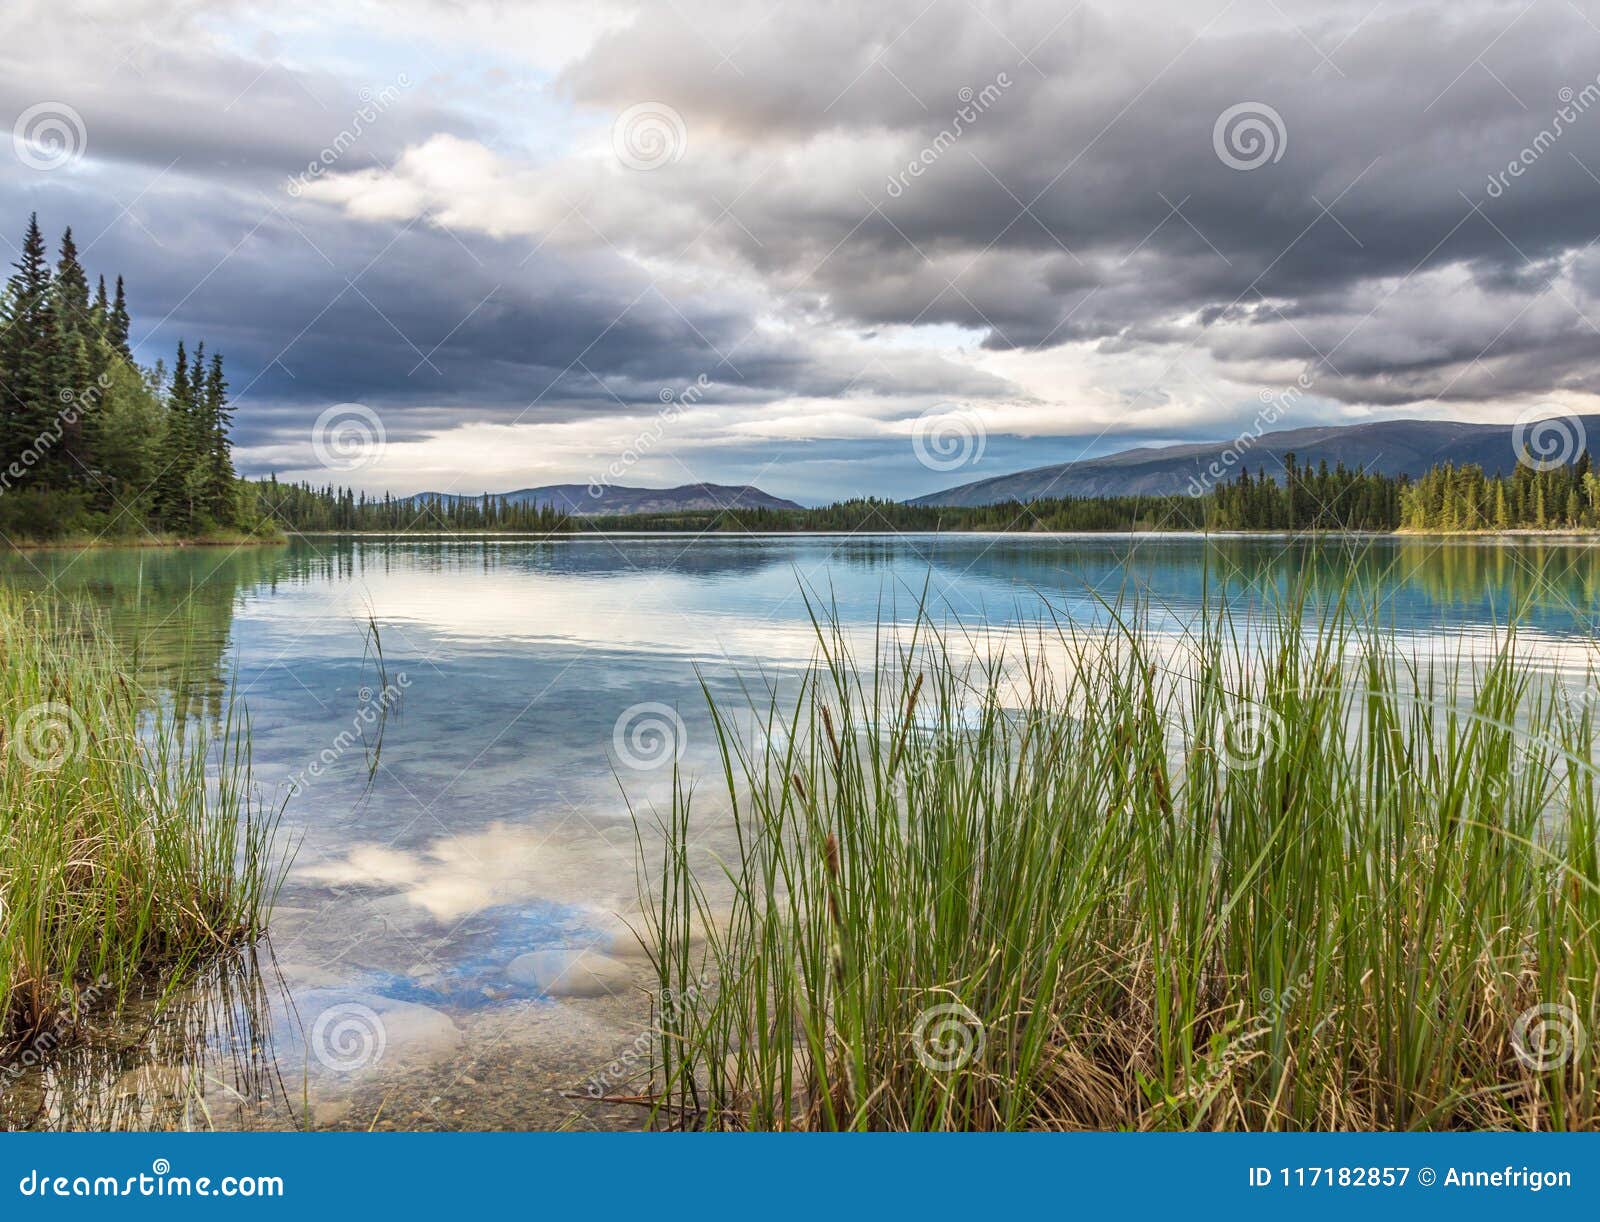 forest and scattered cloud reflected in clear, calm boya lake